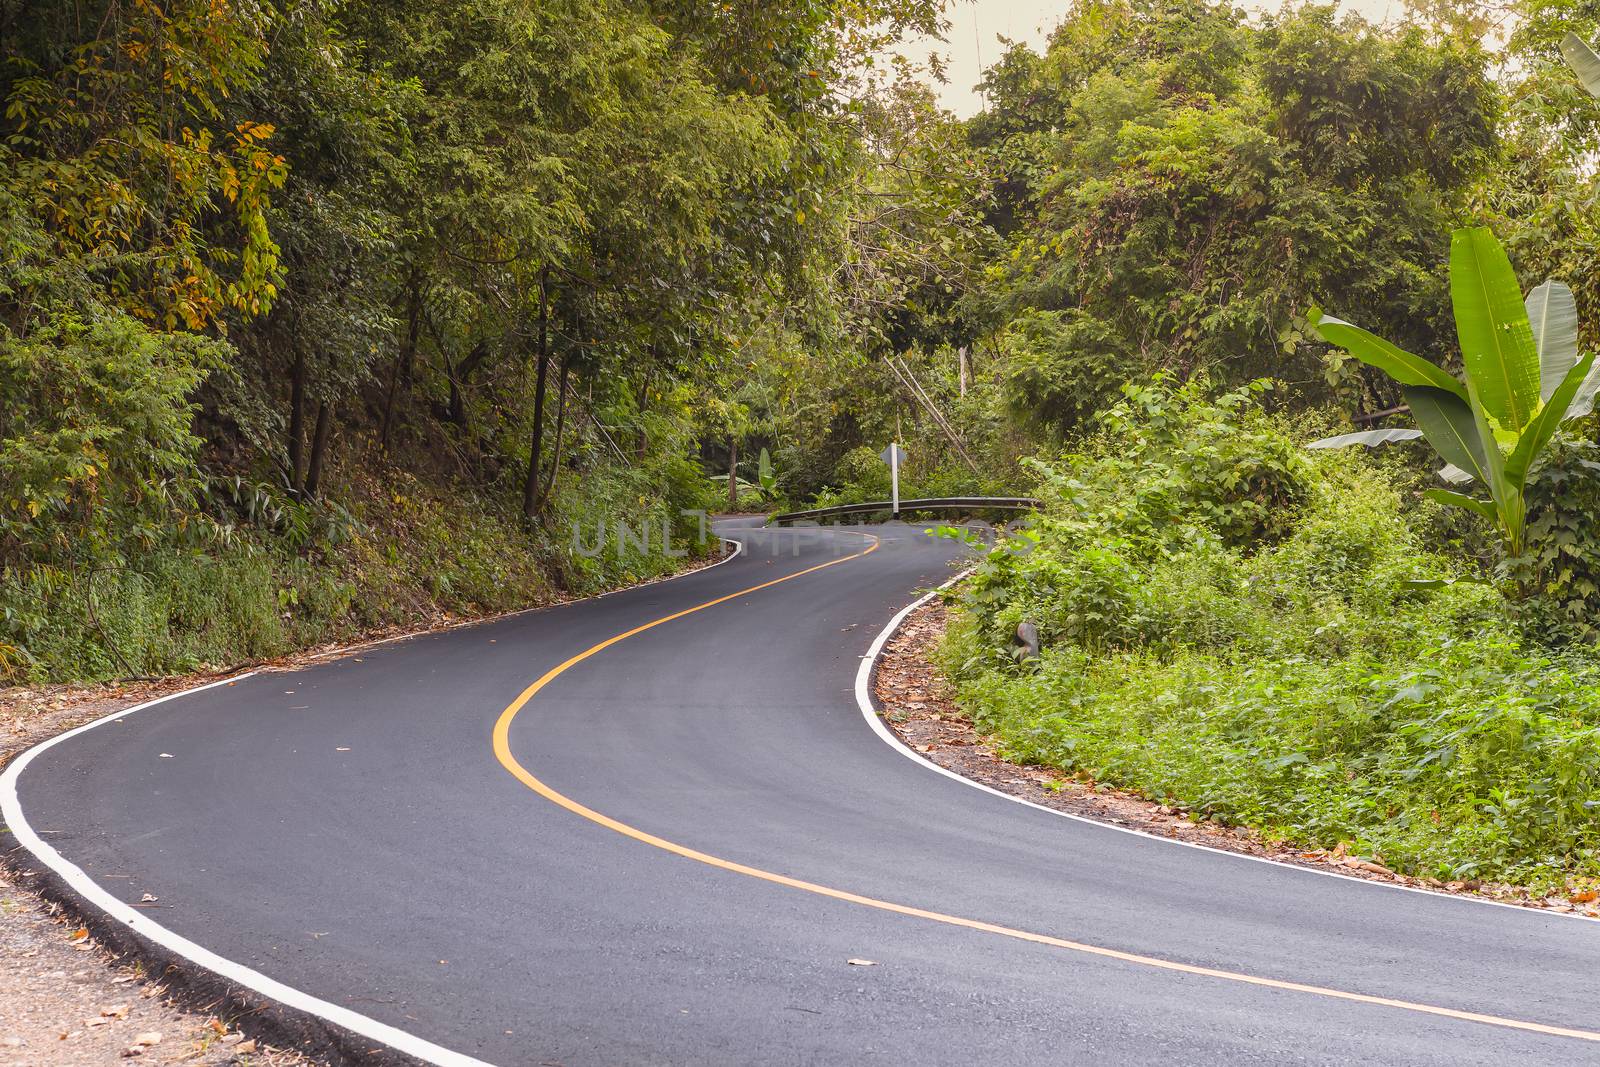 "S" curved asphalt road view in the forest by FrameAngel